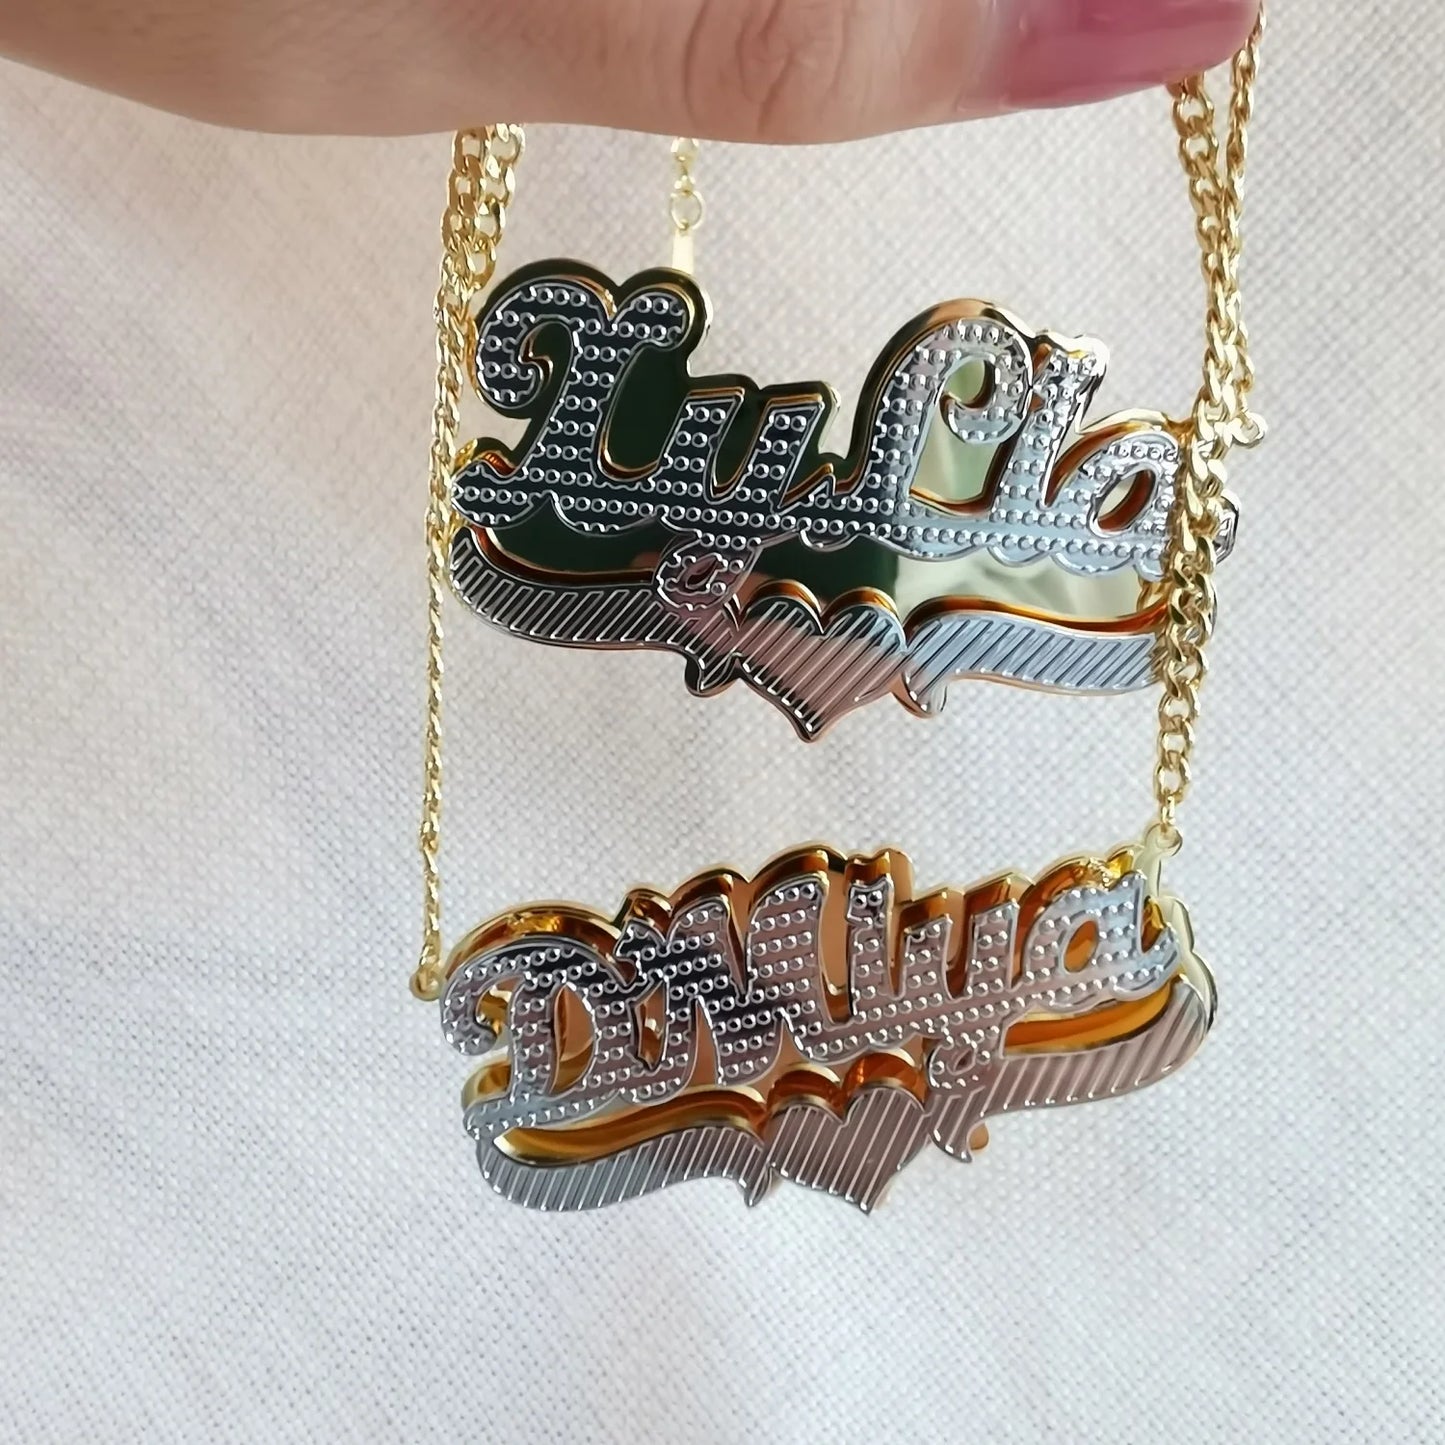 90’s Style Necklace